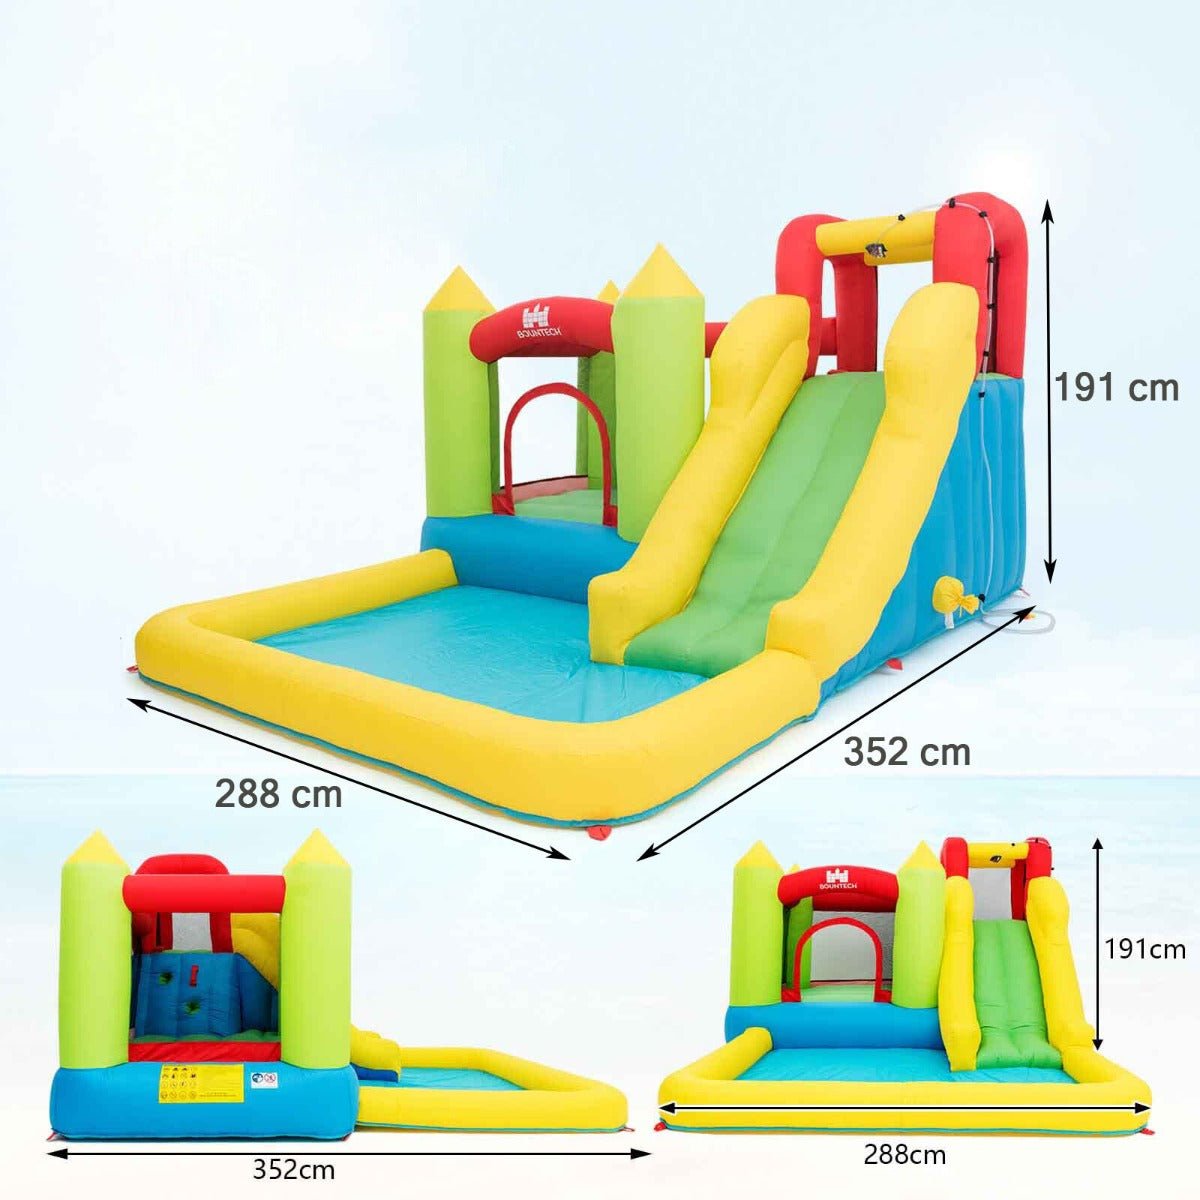 Children's Water Slide Inflatable - Jumping Castle with Splash Pool (Blower Included)